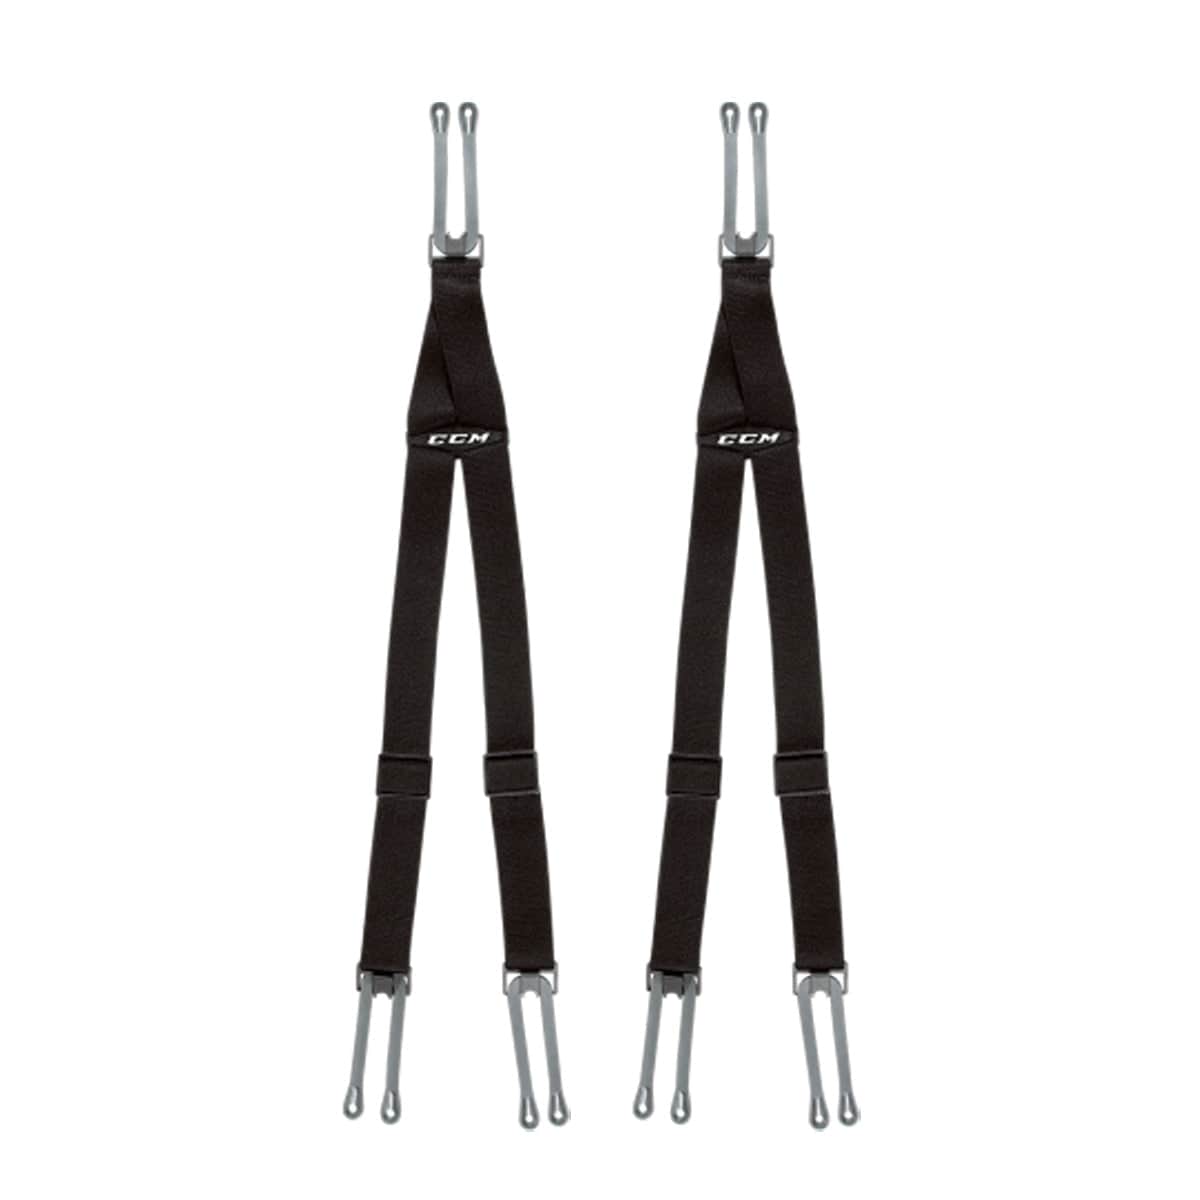 CCM Hockey Suspenders - The Hockey Shop Source For Sports